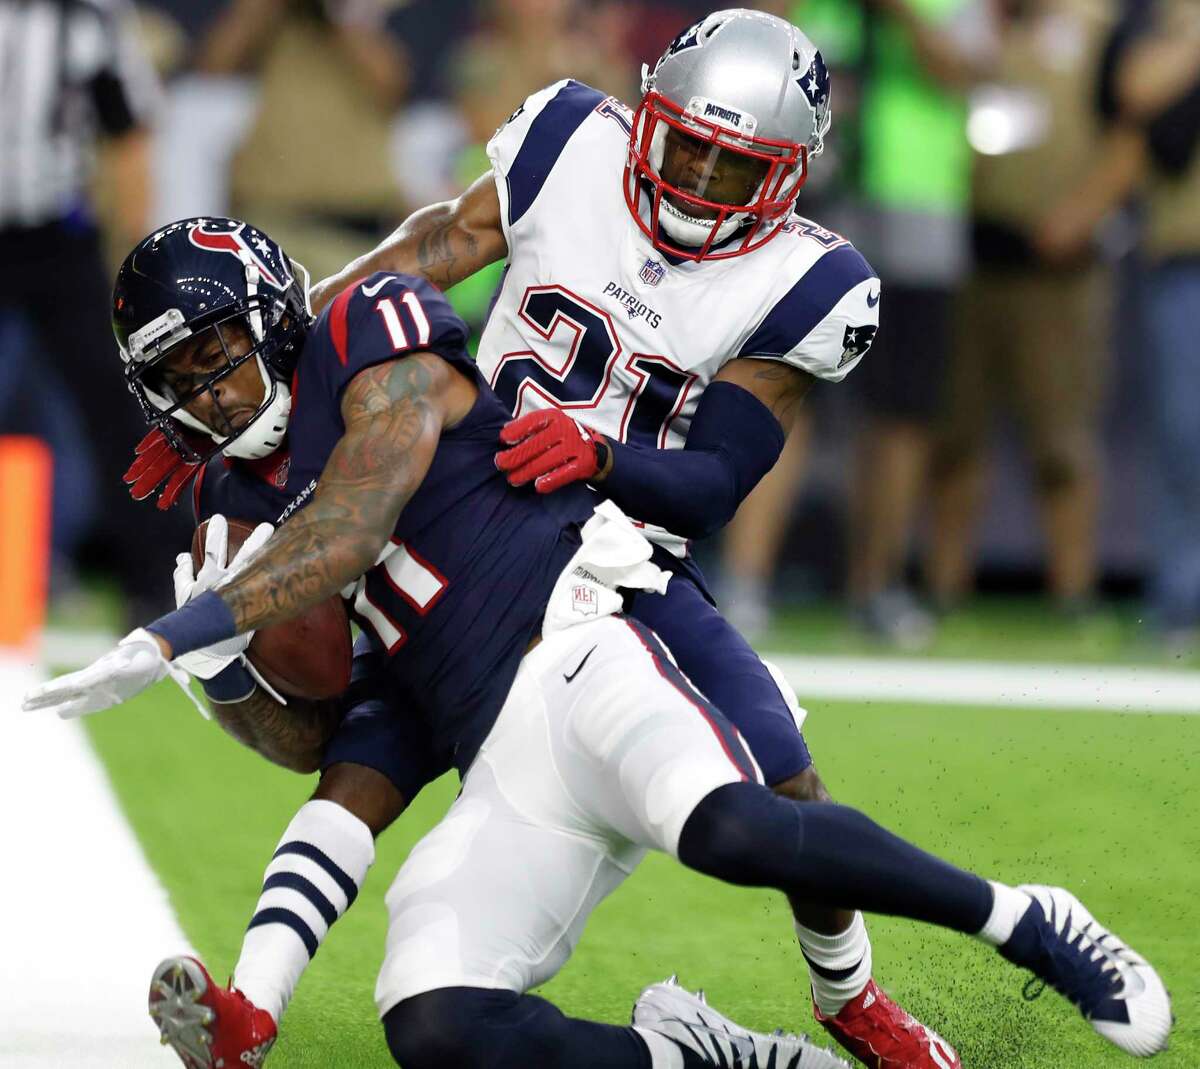 Houston Texans wide receiver Jaelen Strong (11) comes down with a 2-yard touchdown reception against New England Patriots cornerback Malcolm Butler (21) during the first quarter of an NFL preseason game at NRG Stadium, Saturday, Aug. 19, 2017, in Houston. ( Karen Warren / Houston Chronicle )